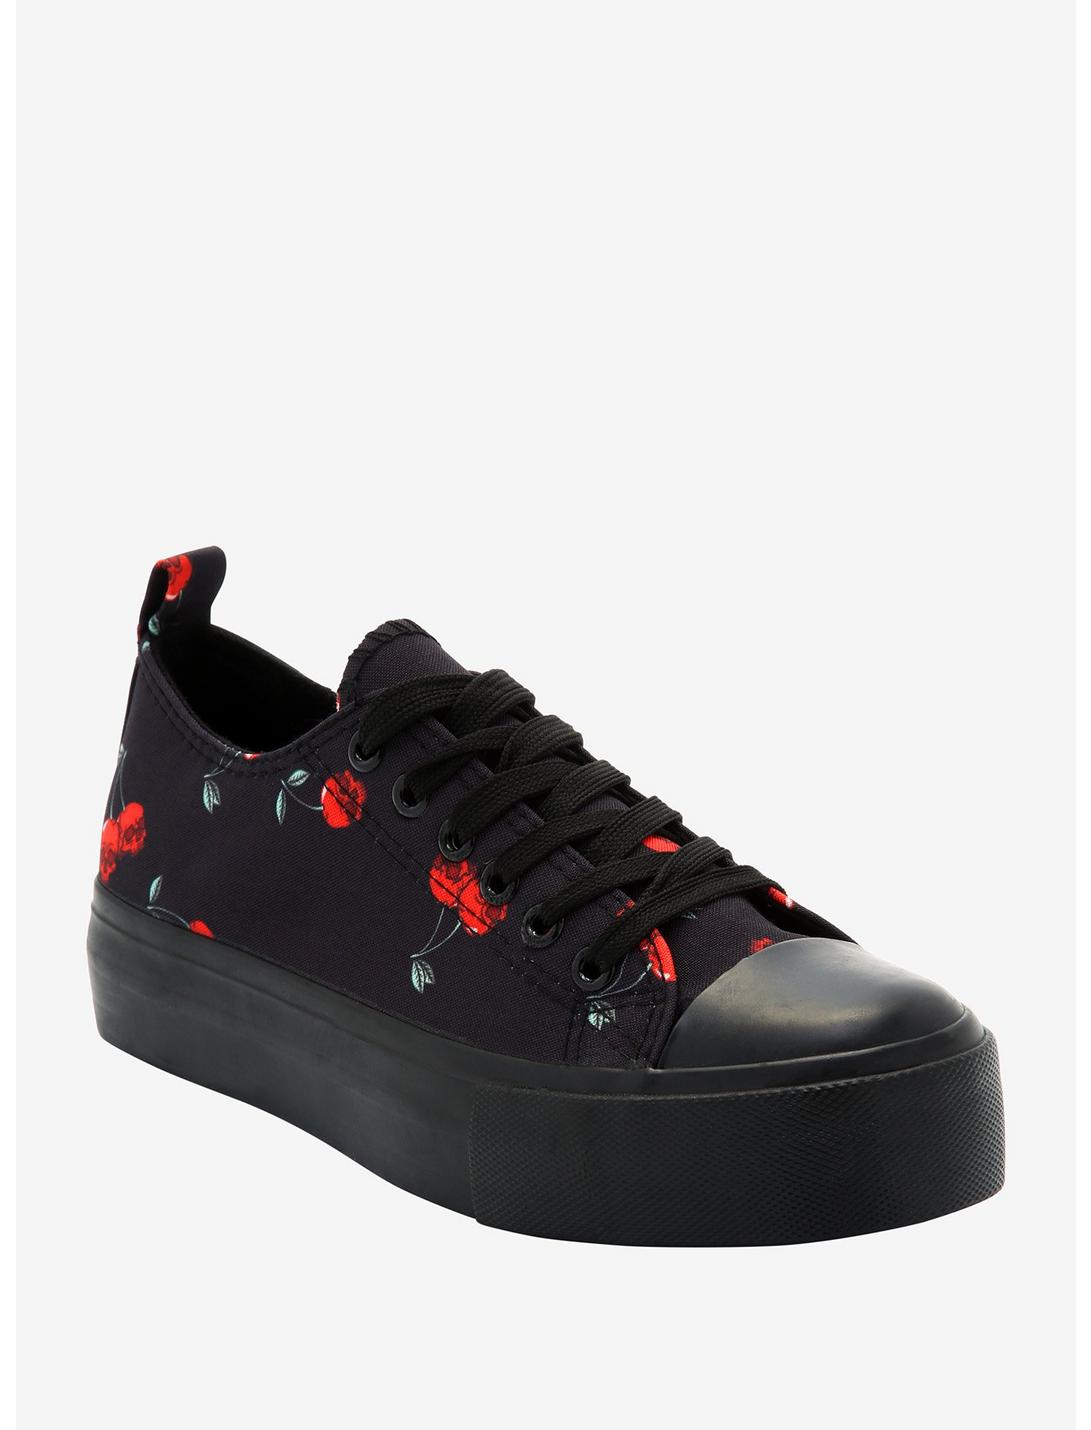 Cherry Skull Lace-Up Platform Sneakers, MULTI, hi-res